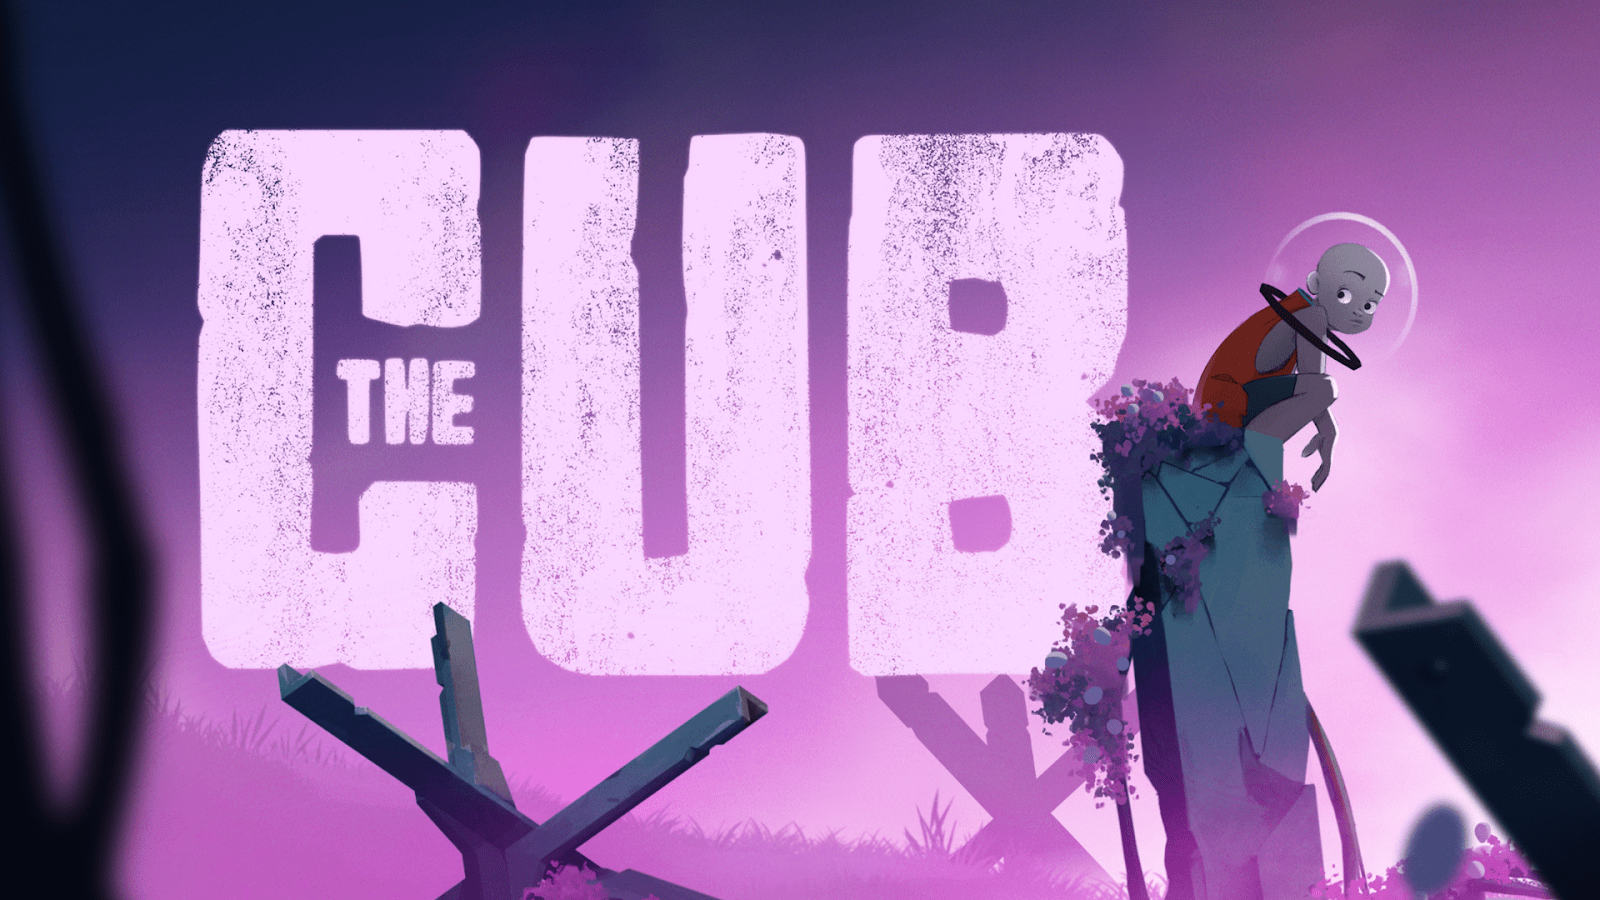 The Jungle Book meets the armageddon | The Cub announced by Demagog Studio